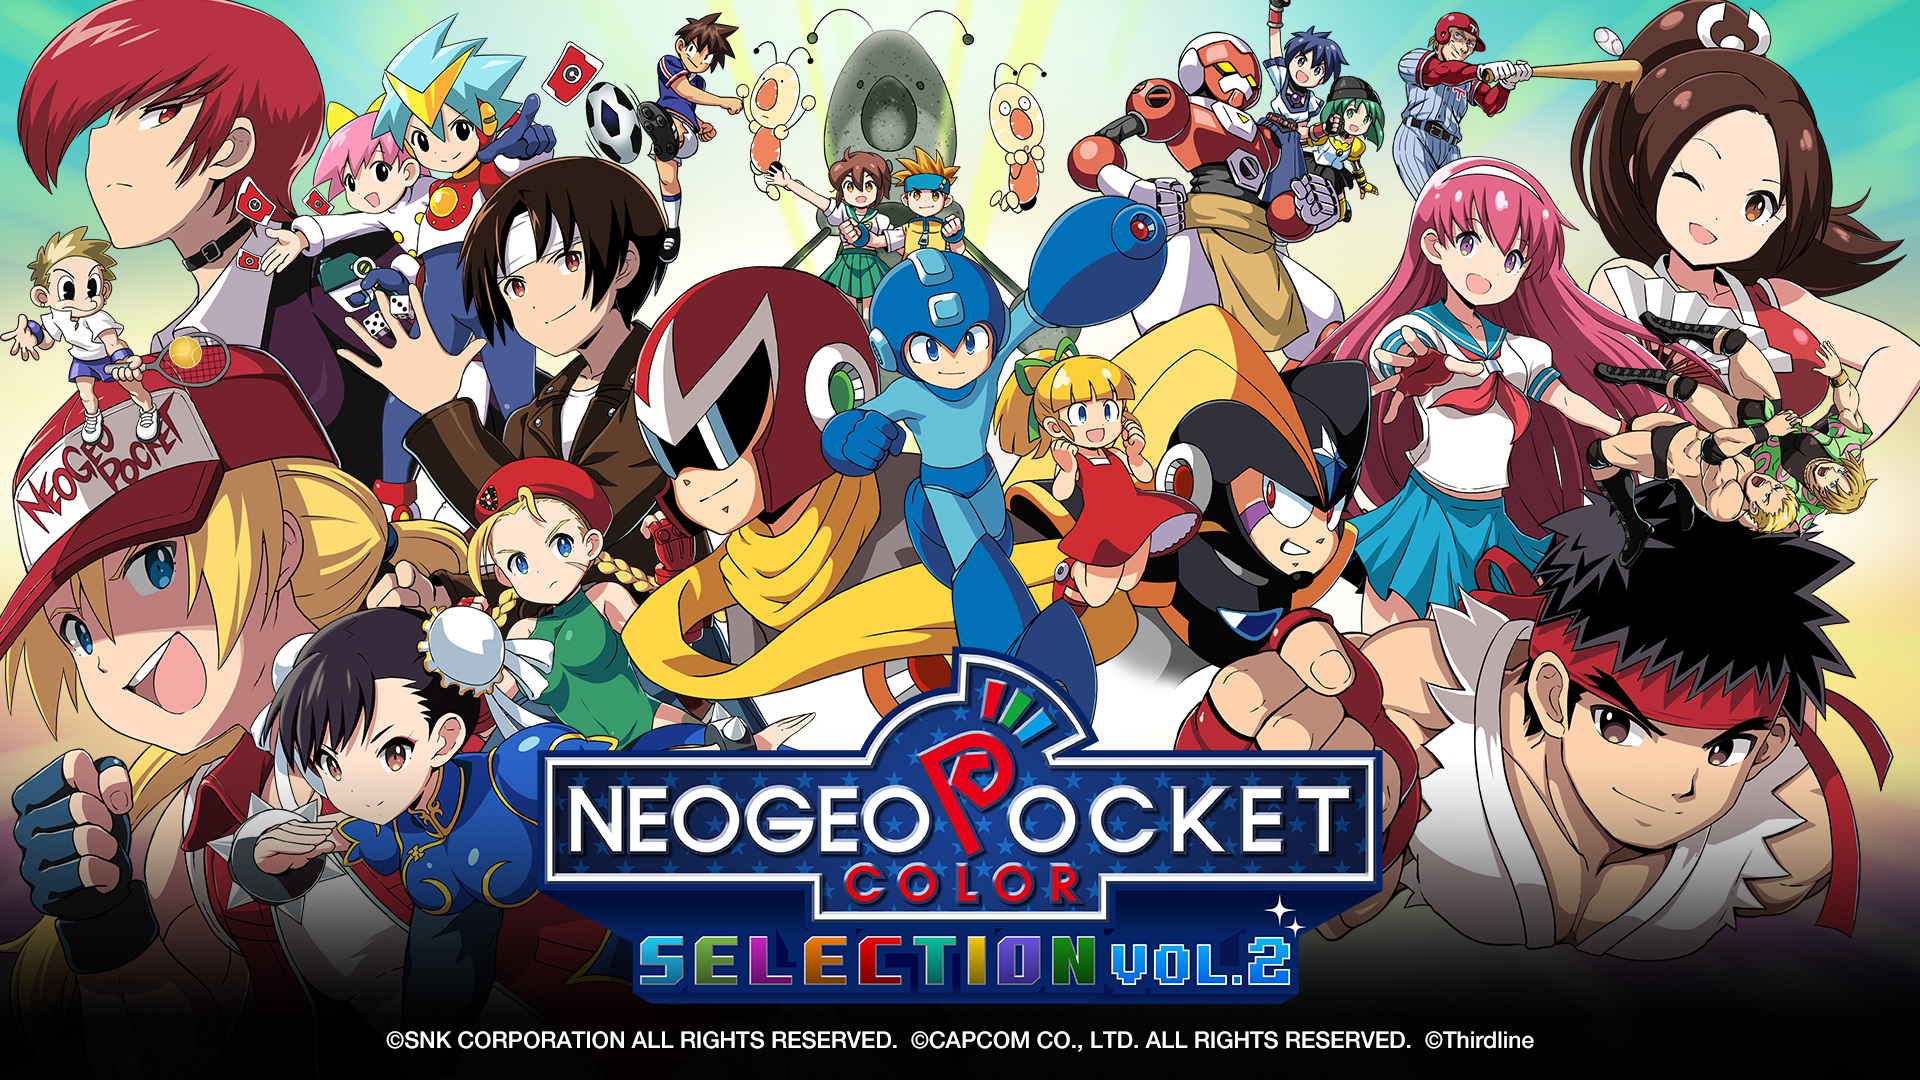 NEOGEO Pocket Color Selection Vol. 2 launches in November